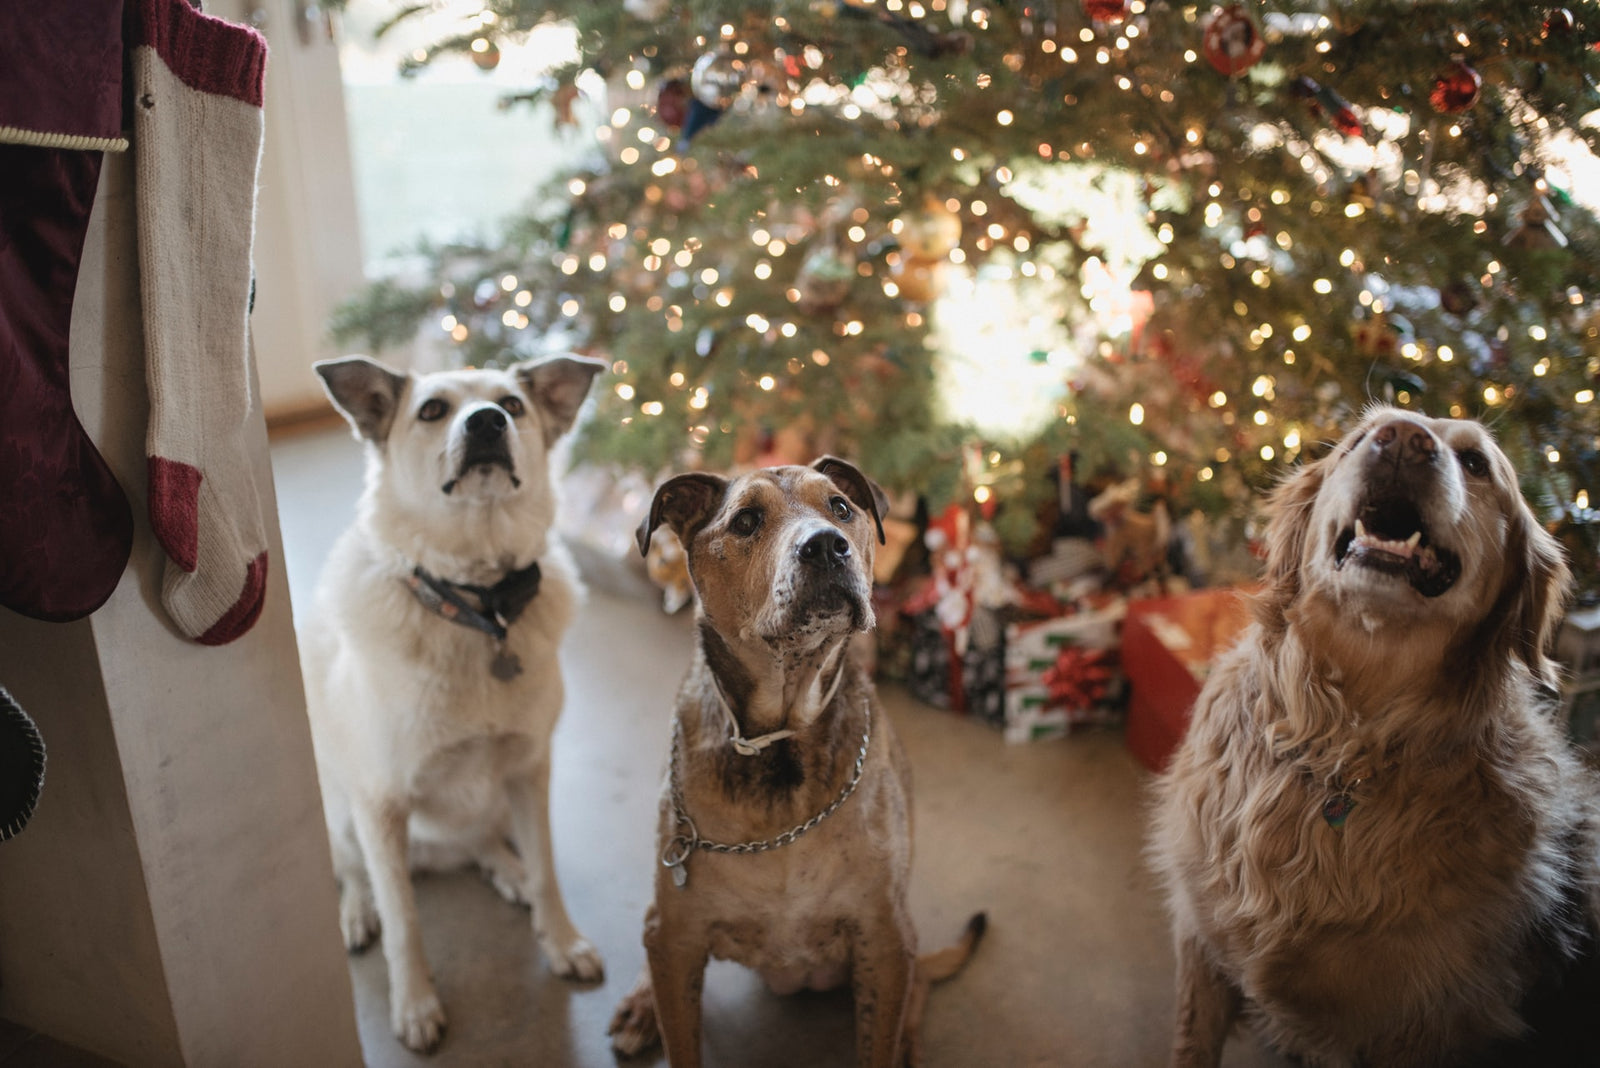 dogs in front of Christmas tree and stockings